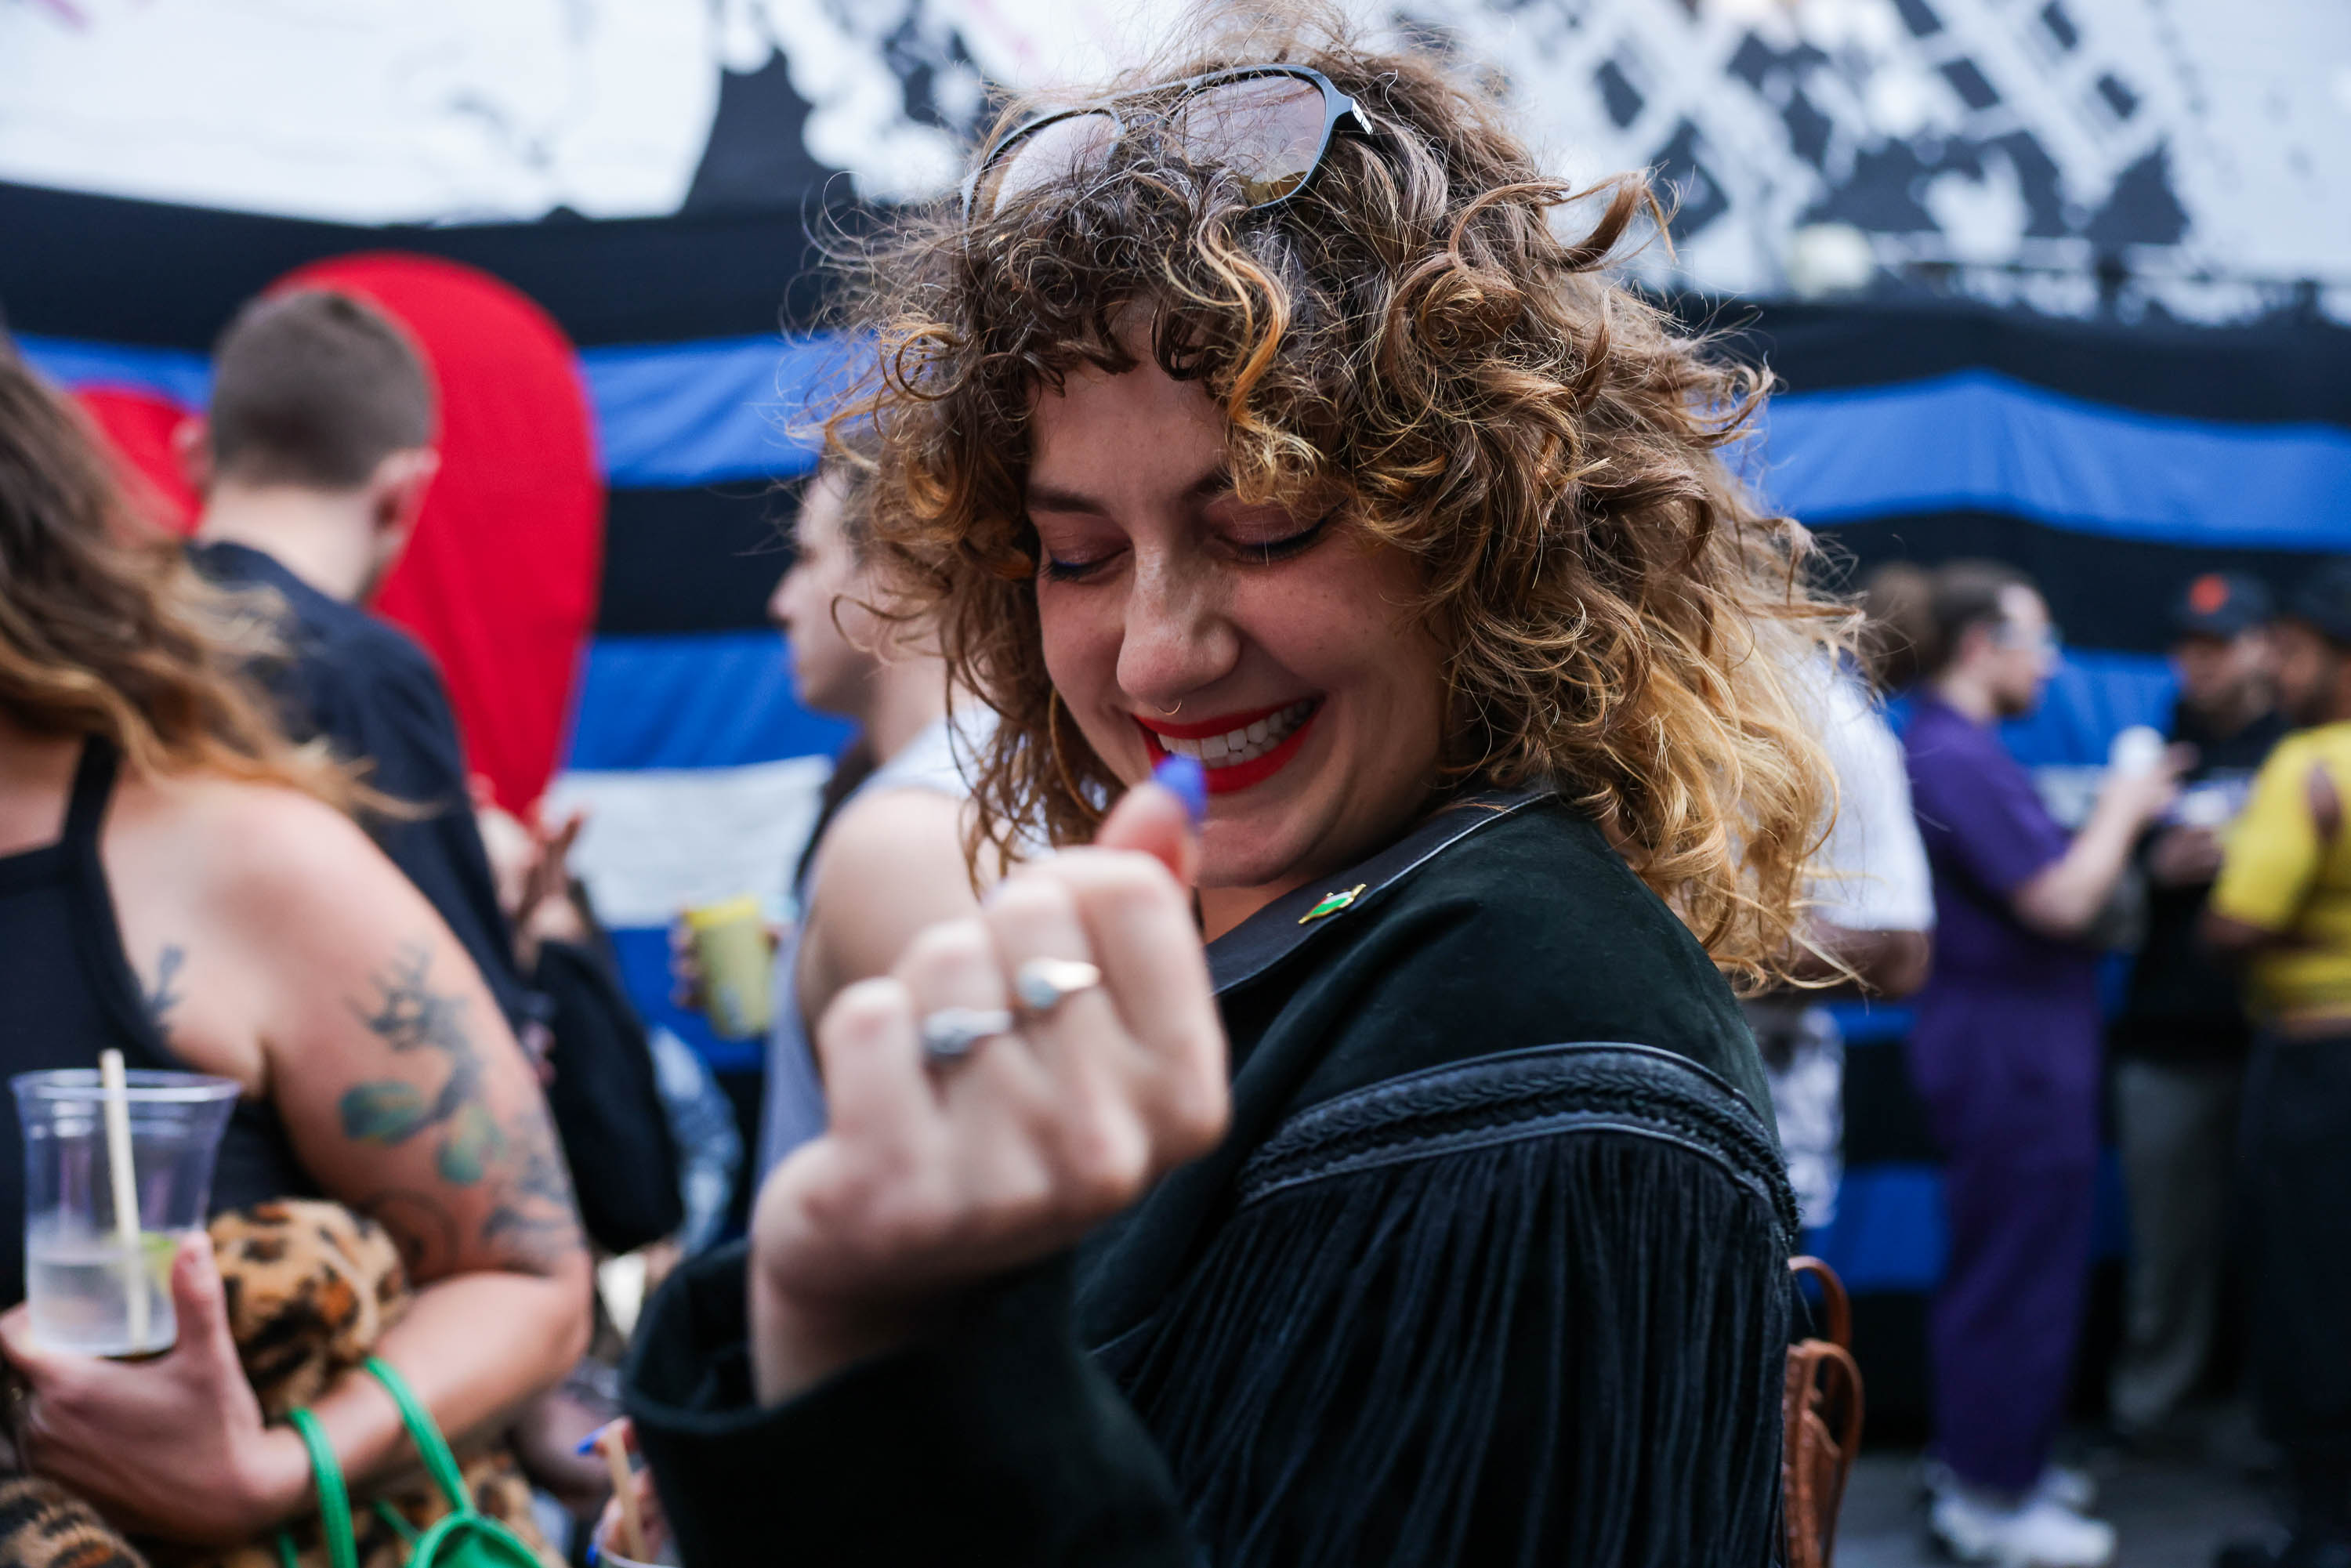 A smiling woman with curly hair, holding a clear cup, enjoys a bustling outdoor event.